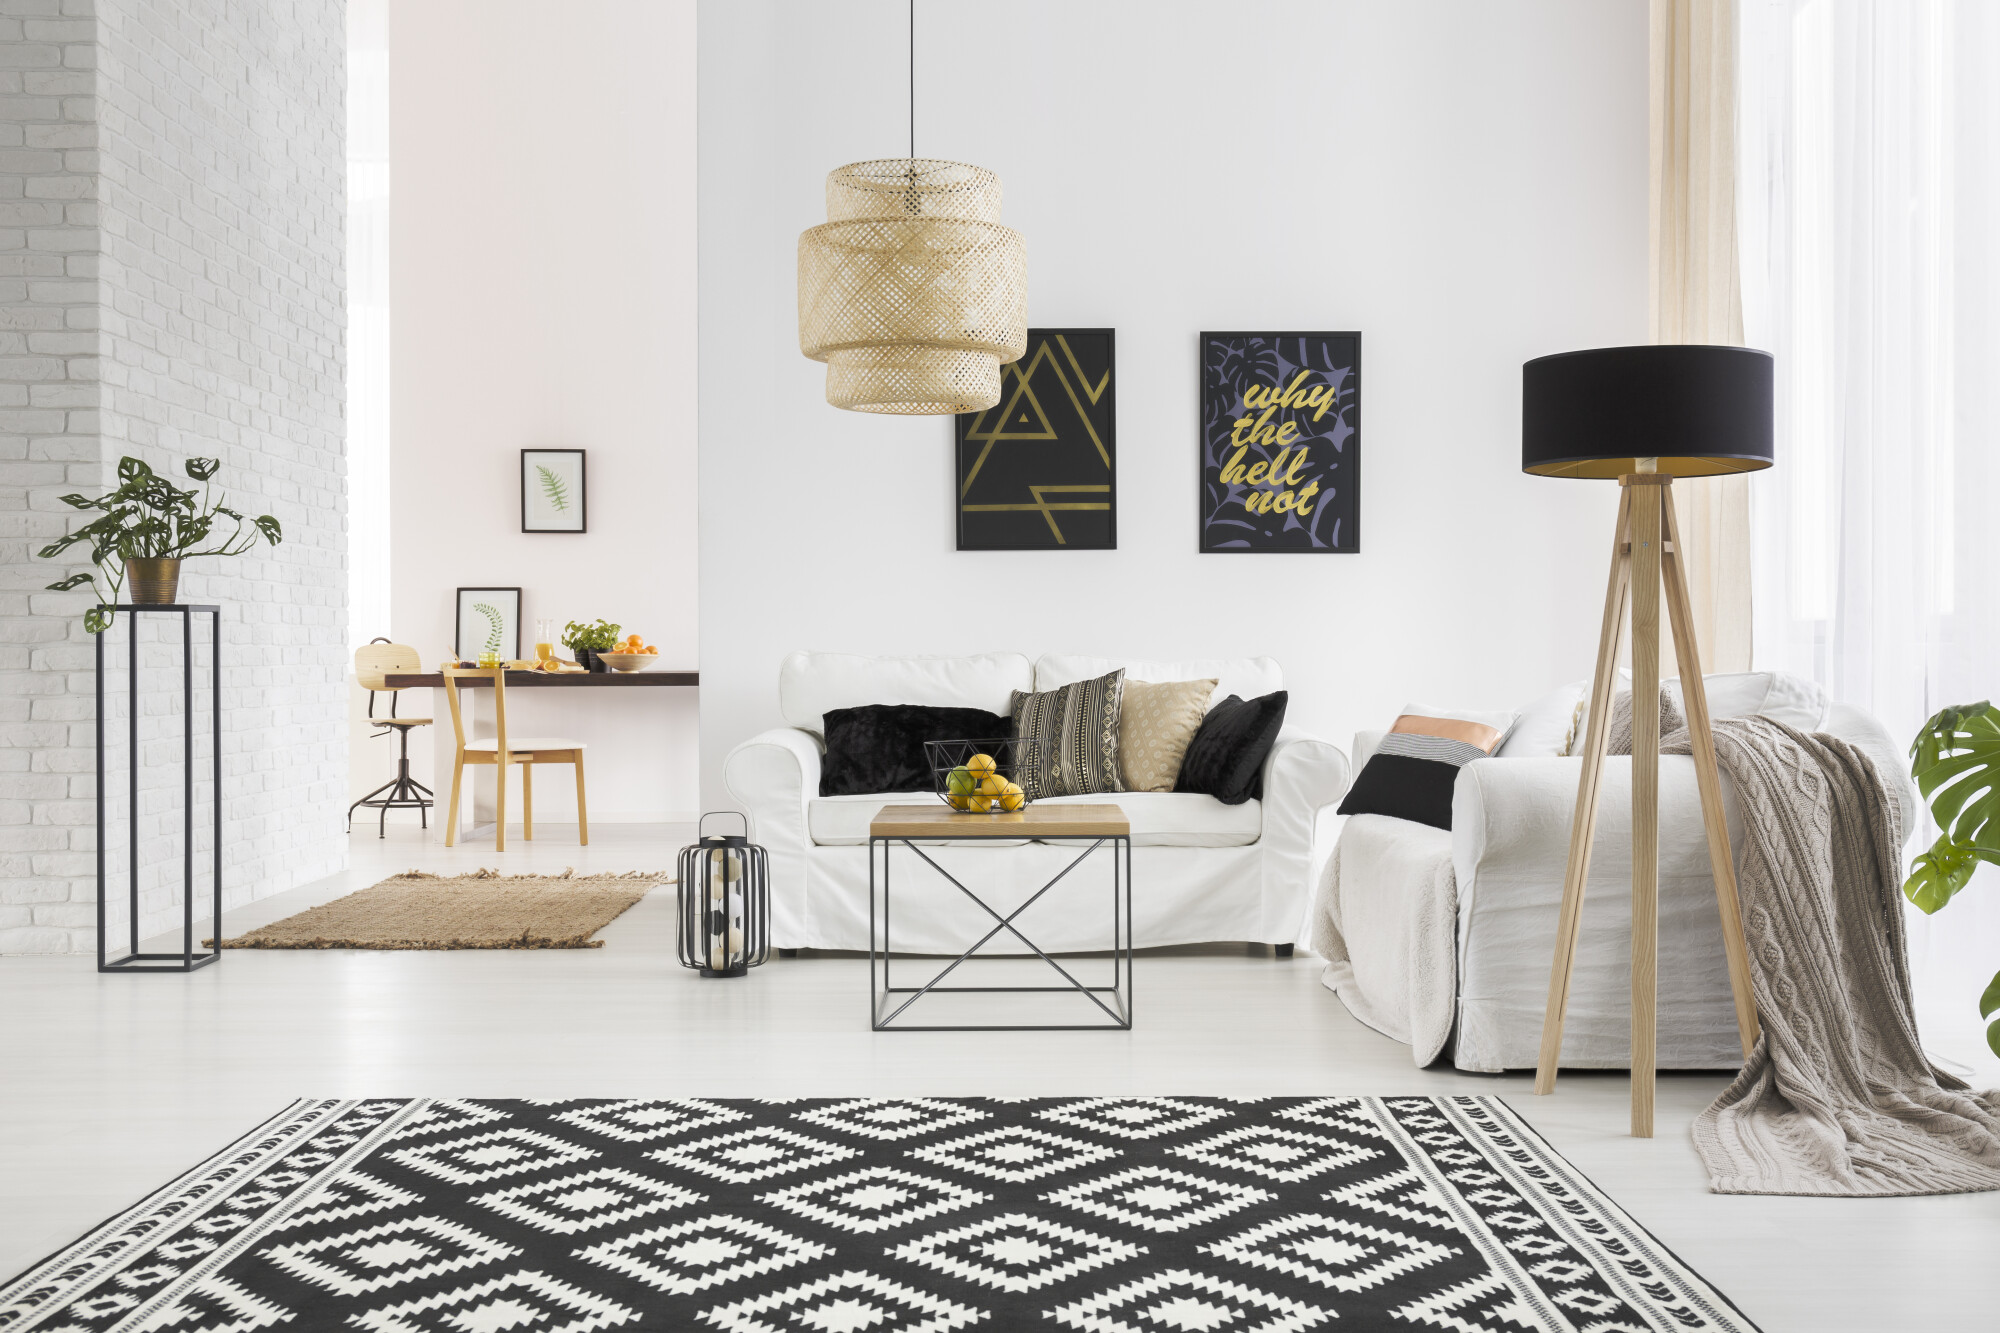 No need to hold back anymore just because your home is rented. Read on to discover rental decor ideas for homeowners here.